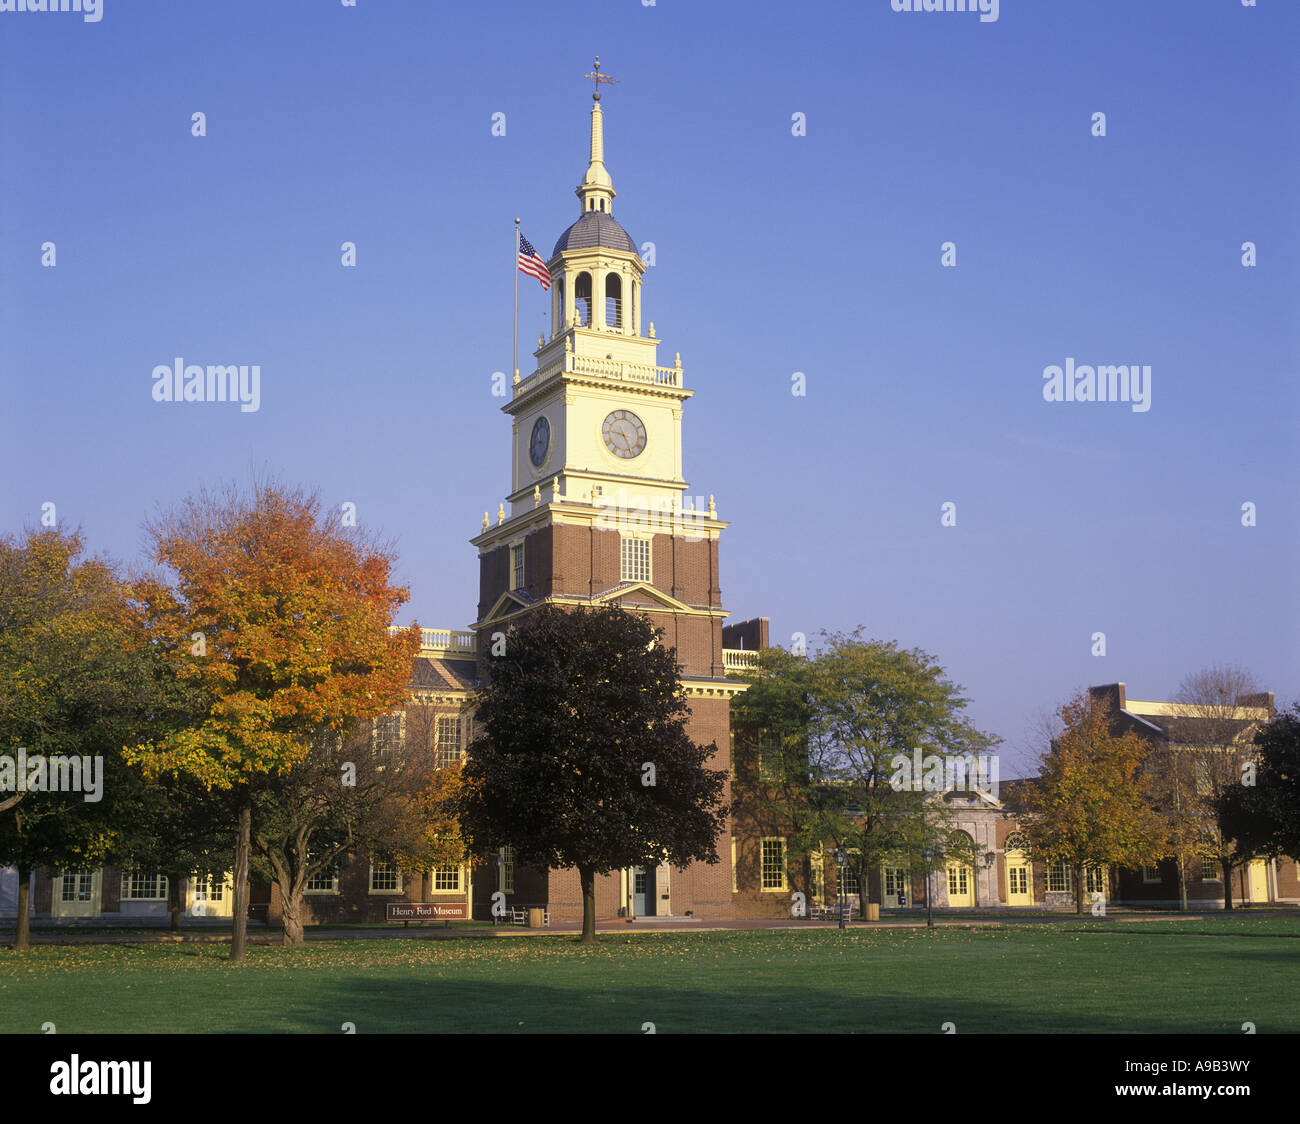 CLOCK TOWER AND INDEPENDENCE HALL REPLICA HENRY FORD MUSEUM DEARBORN MICHIGAN USA Stock Photo